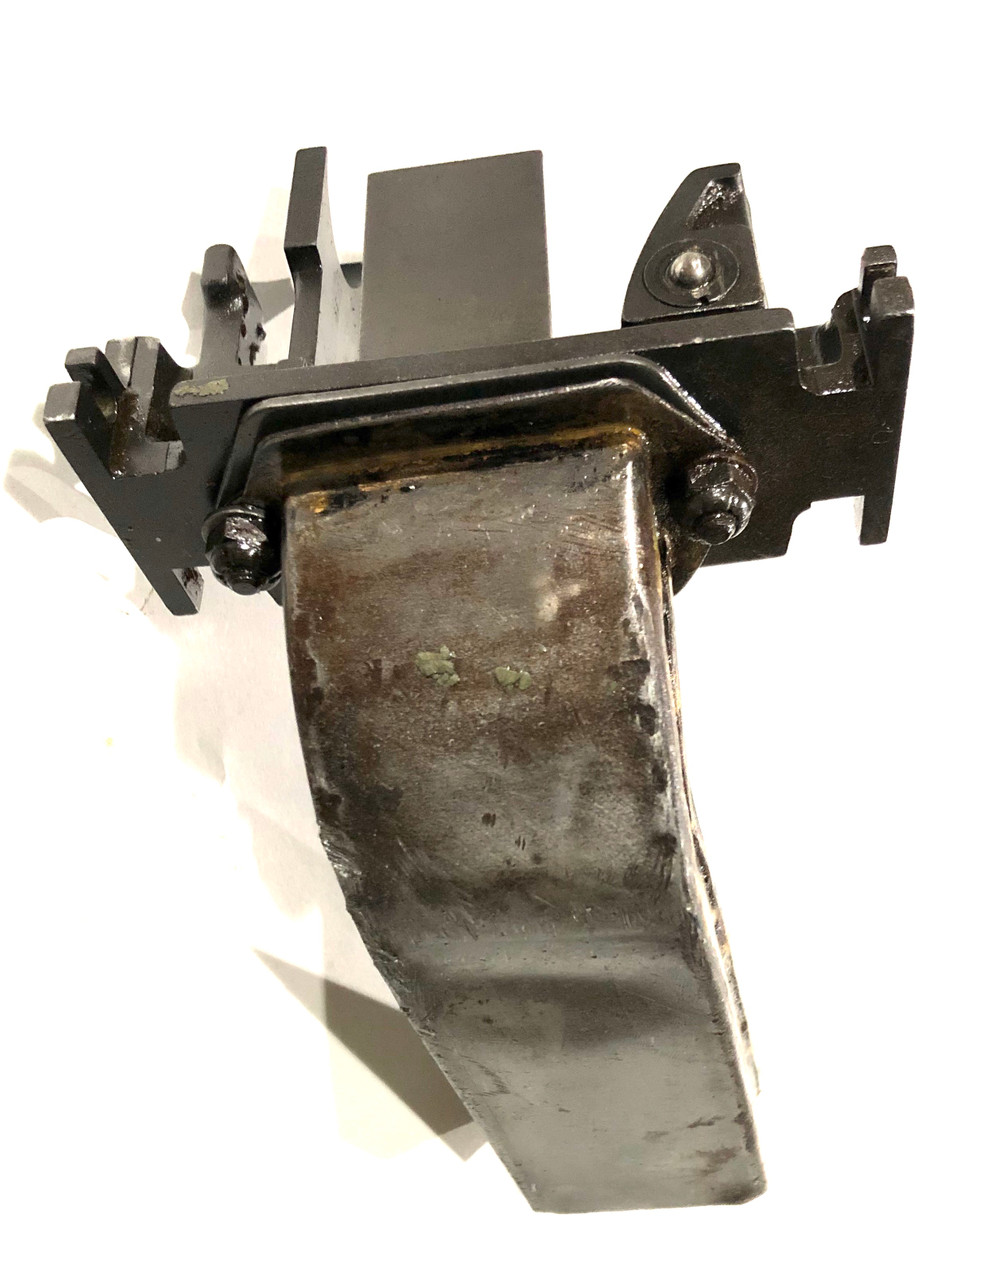 Link Chute Assembly with Cartridge Stop- LOW GRADE CONDITION